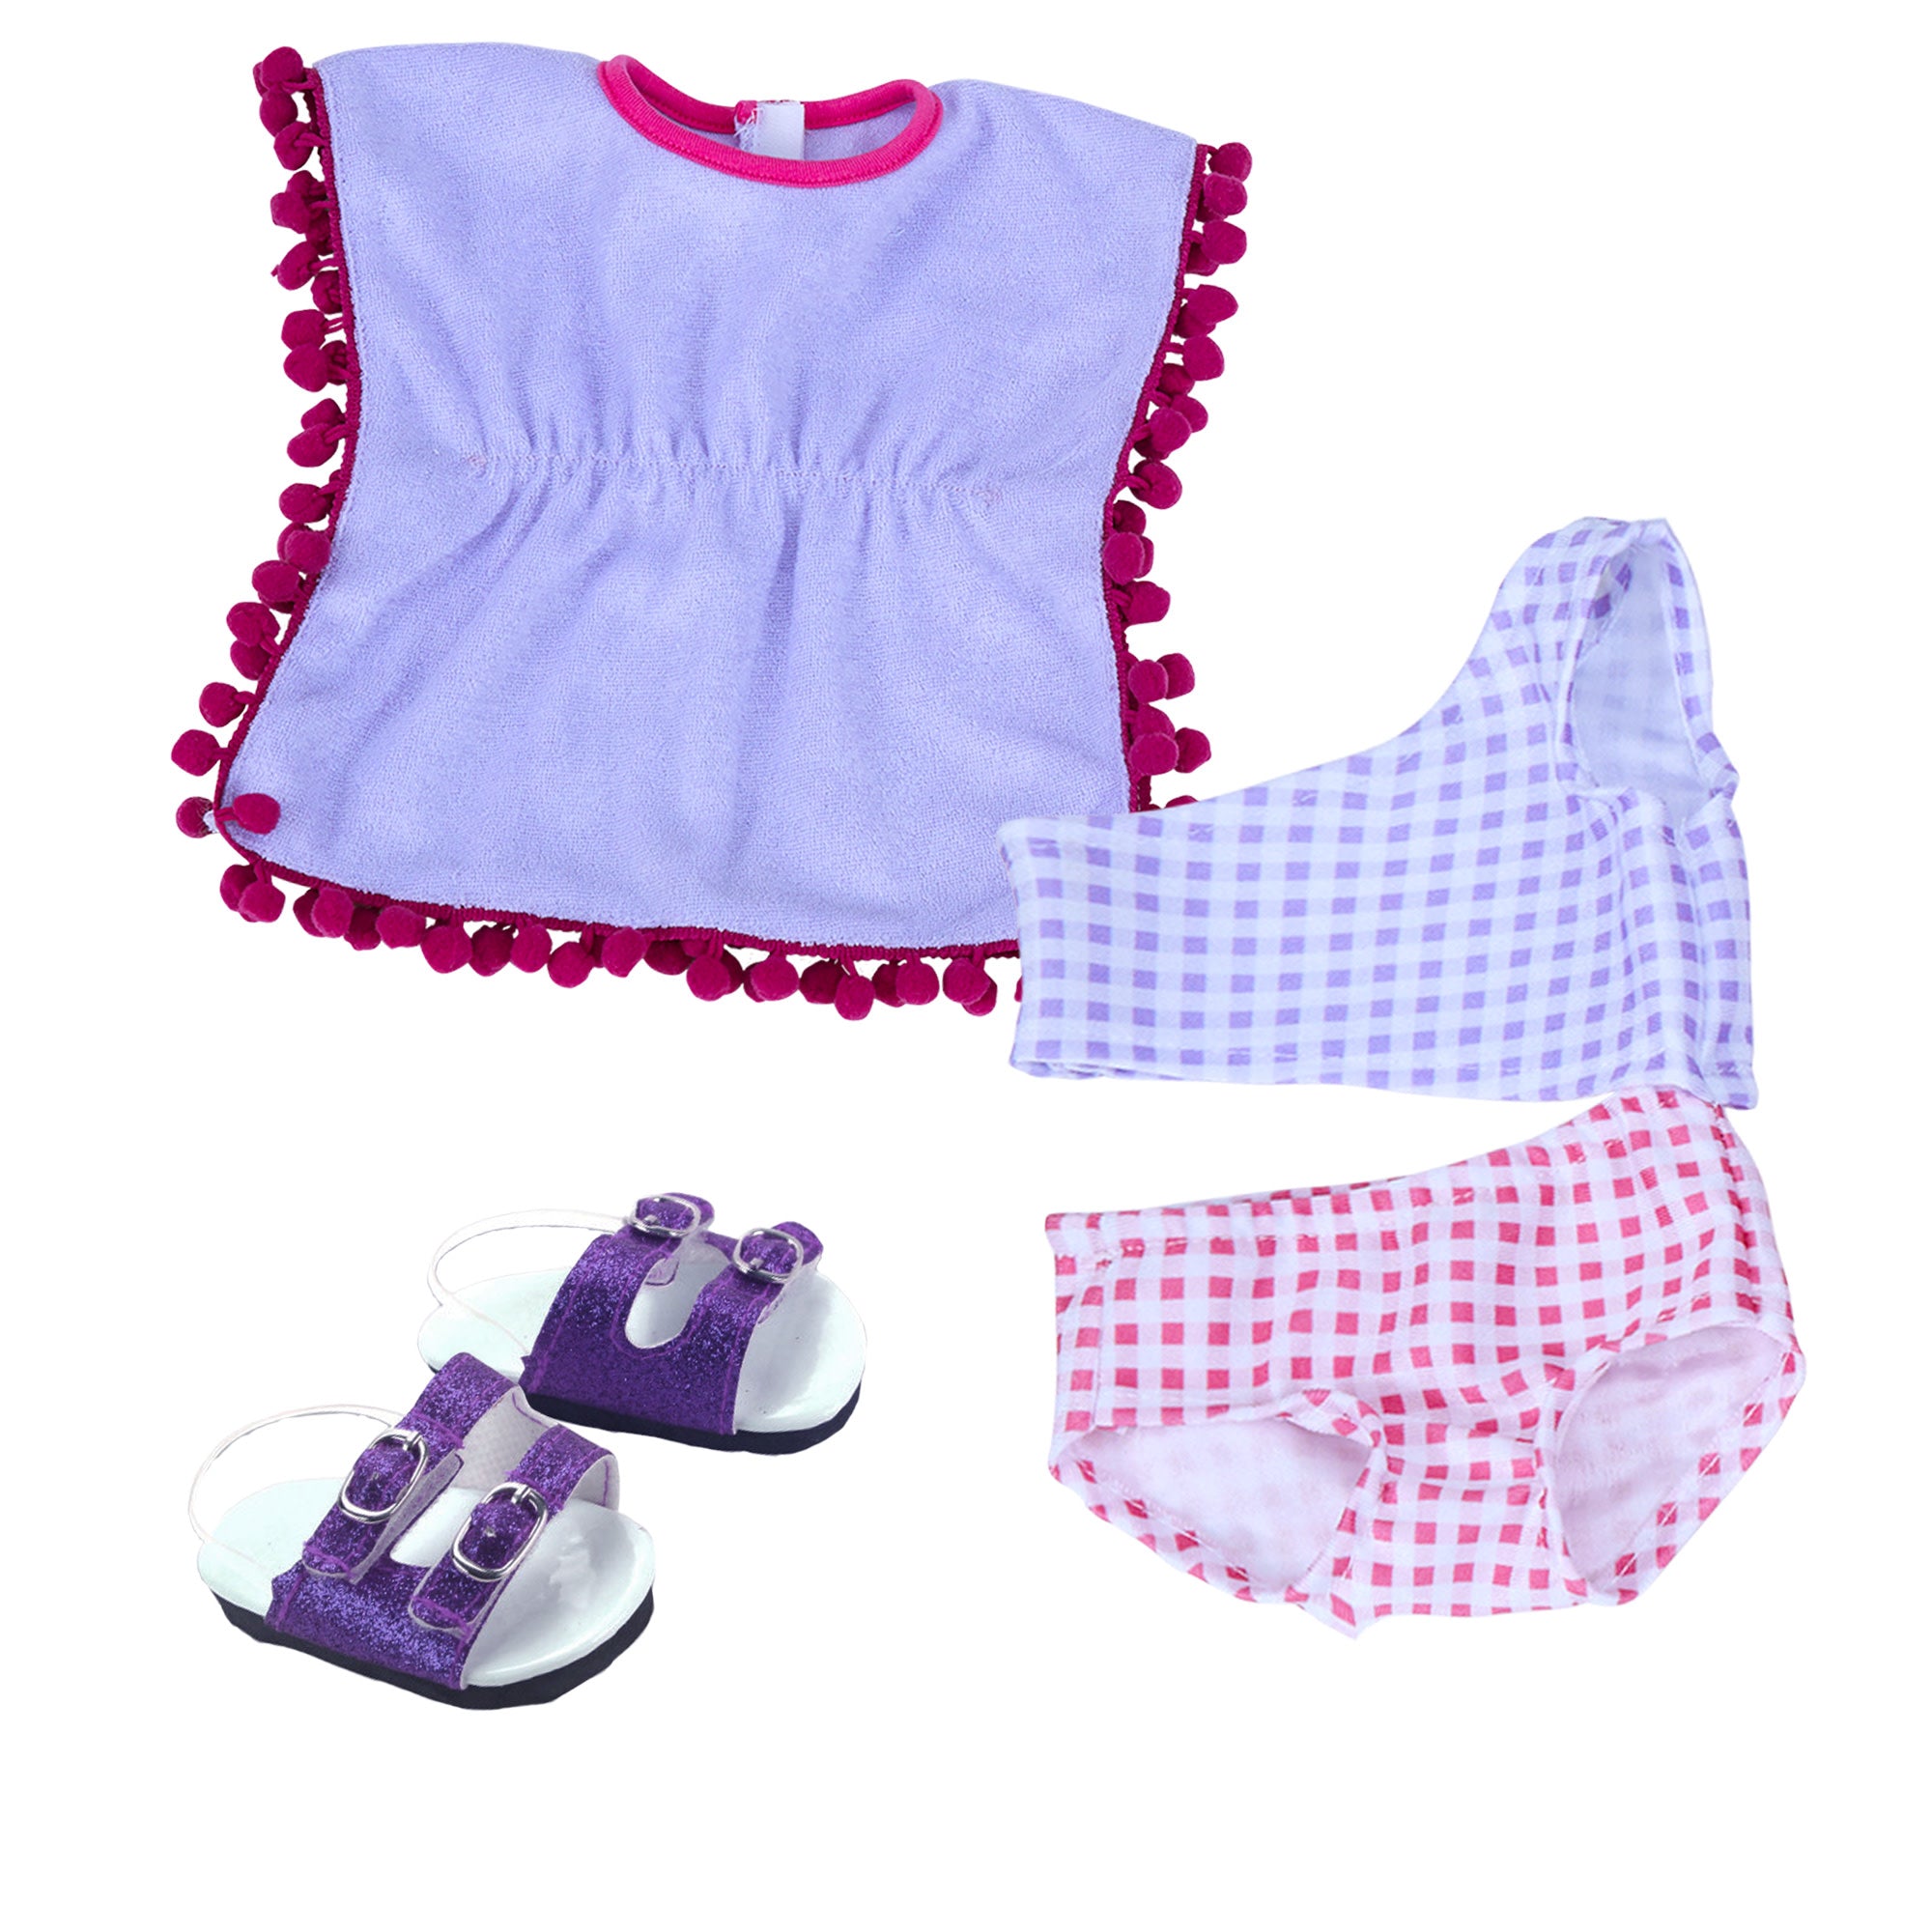 Sophia's 3 Piece Swim Set with Cut-Out Bathing Suit, Cover Up and Sandals for 18" Dolls, Pink/Purple